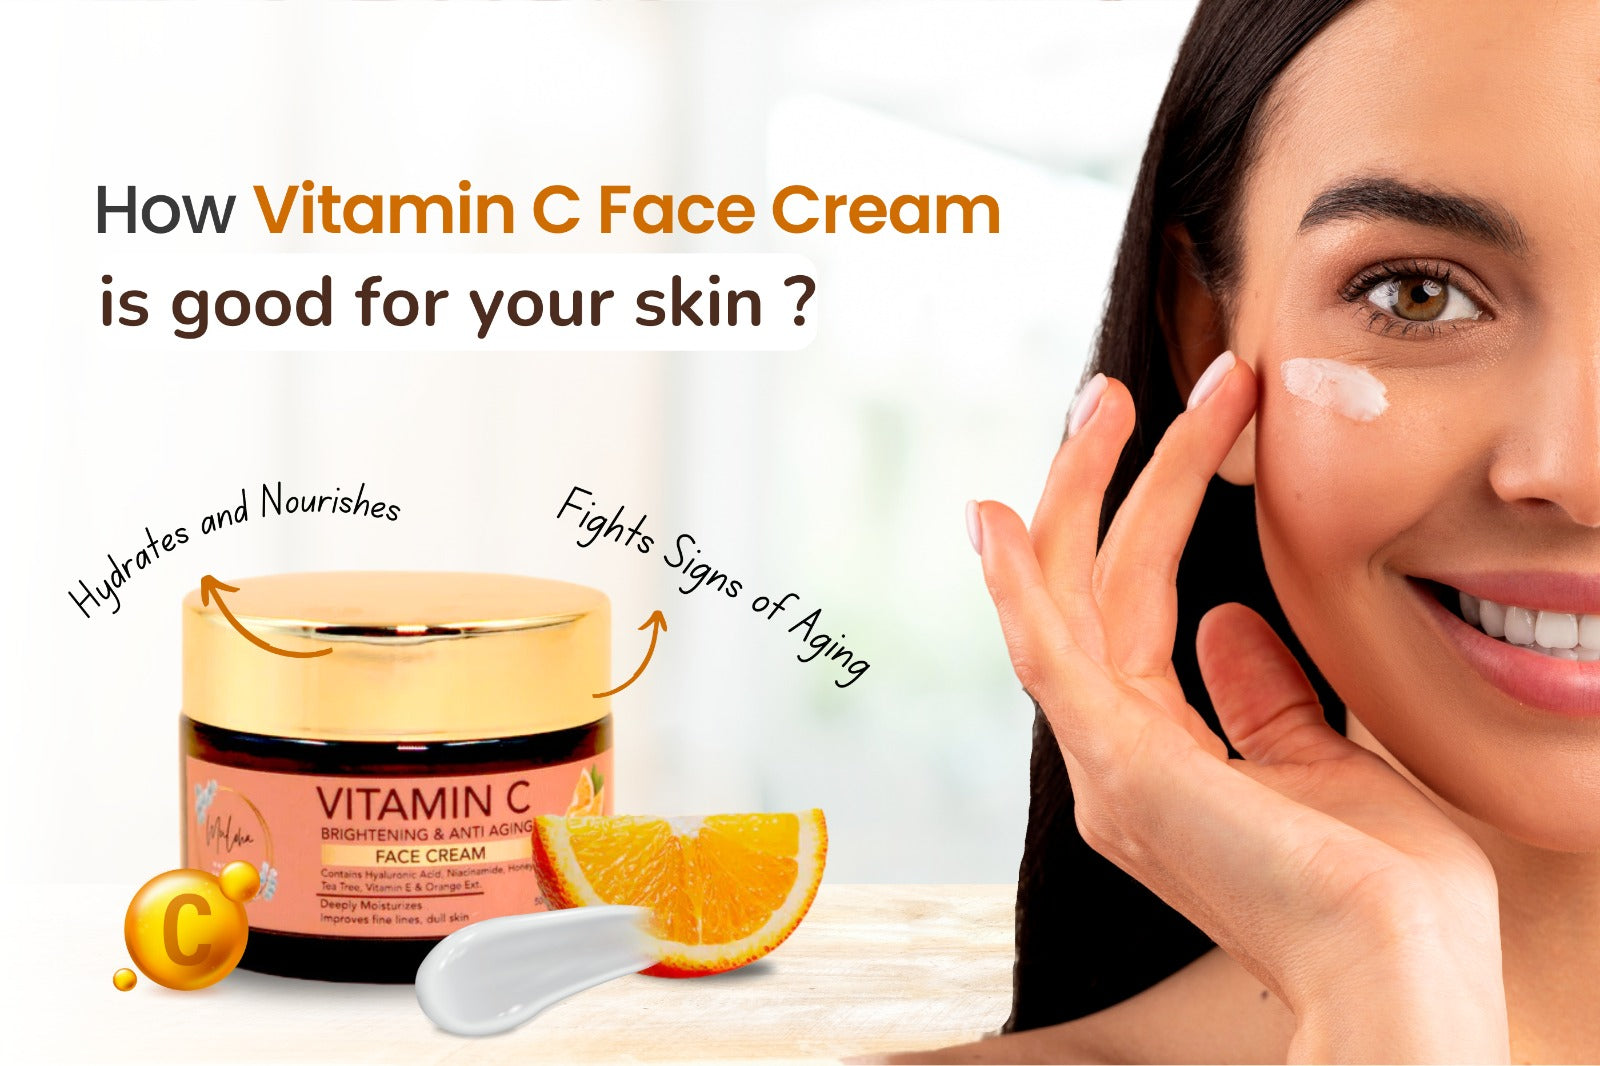 How Vitamin C face cream is good for your skin?